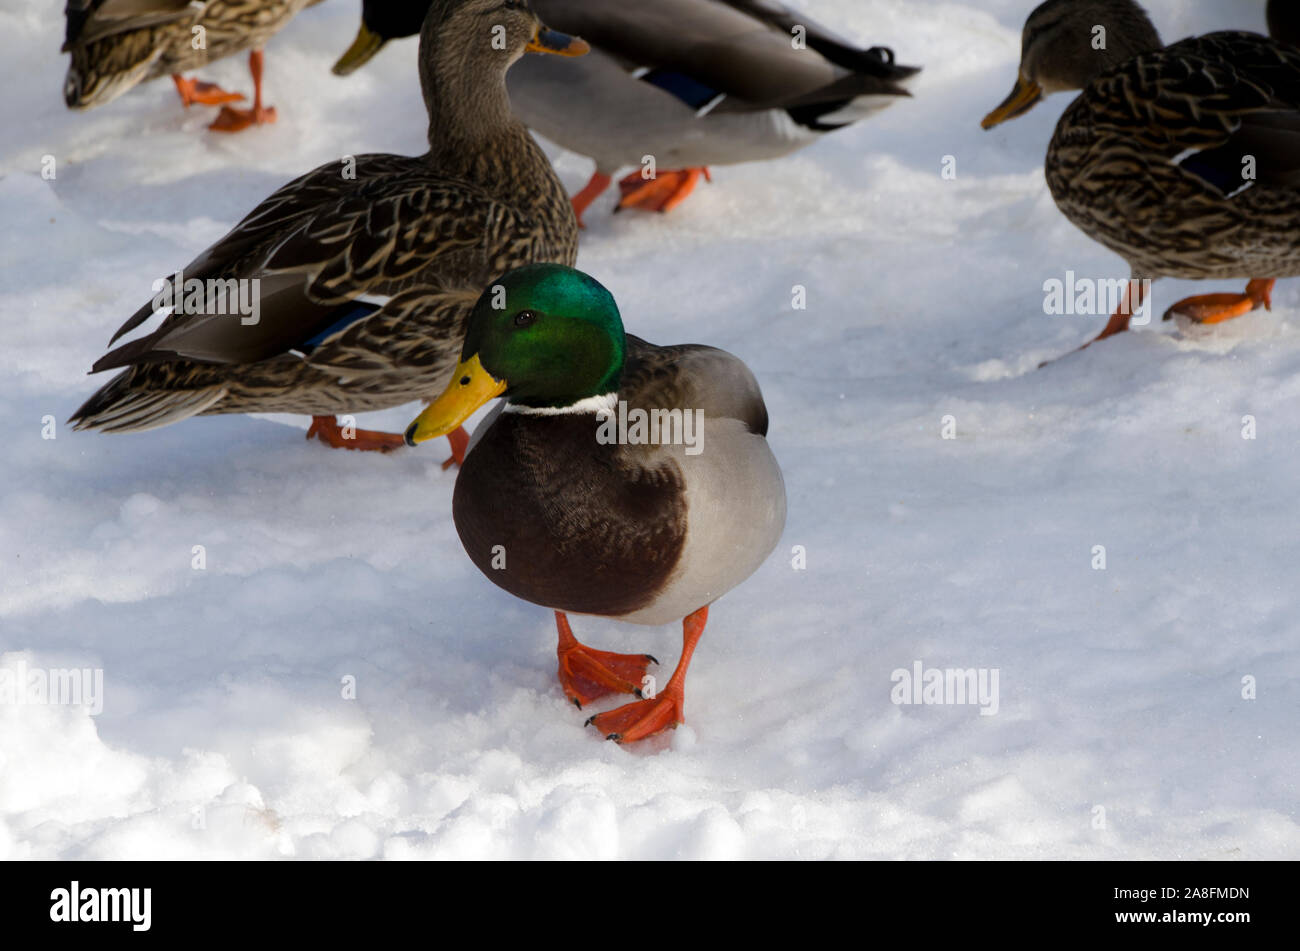 Male Mallard duck with a green head standing in snow walking towards viewer with bright orange feet, Royal River Yarmouth, Maine, USA Stock Photo